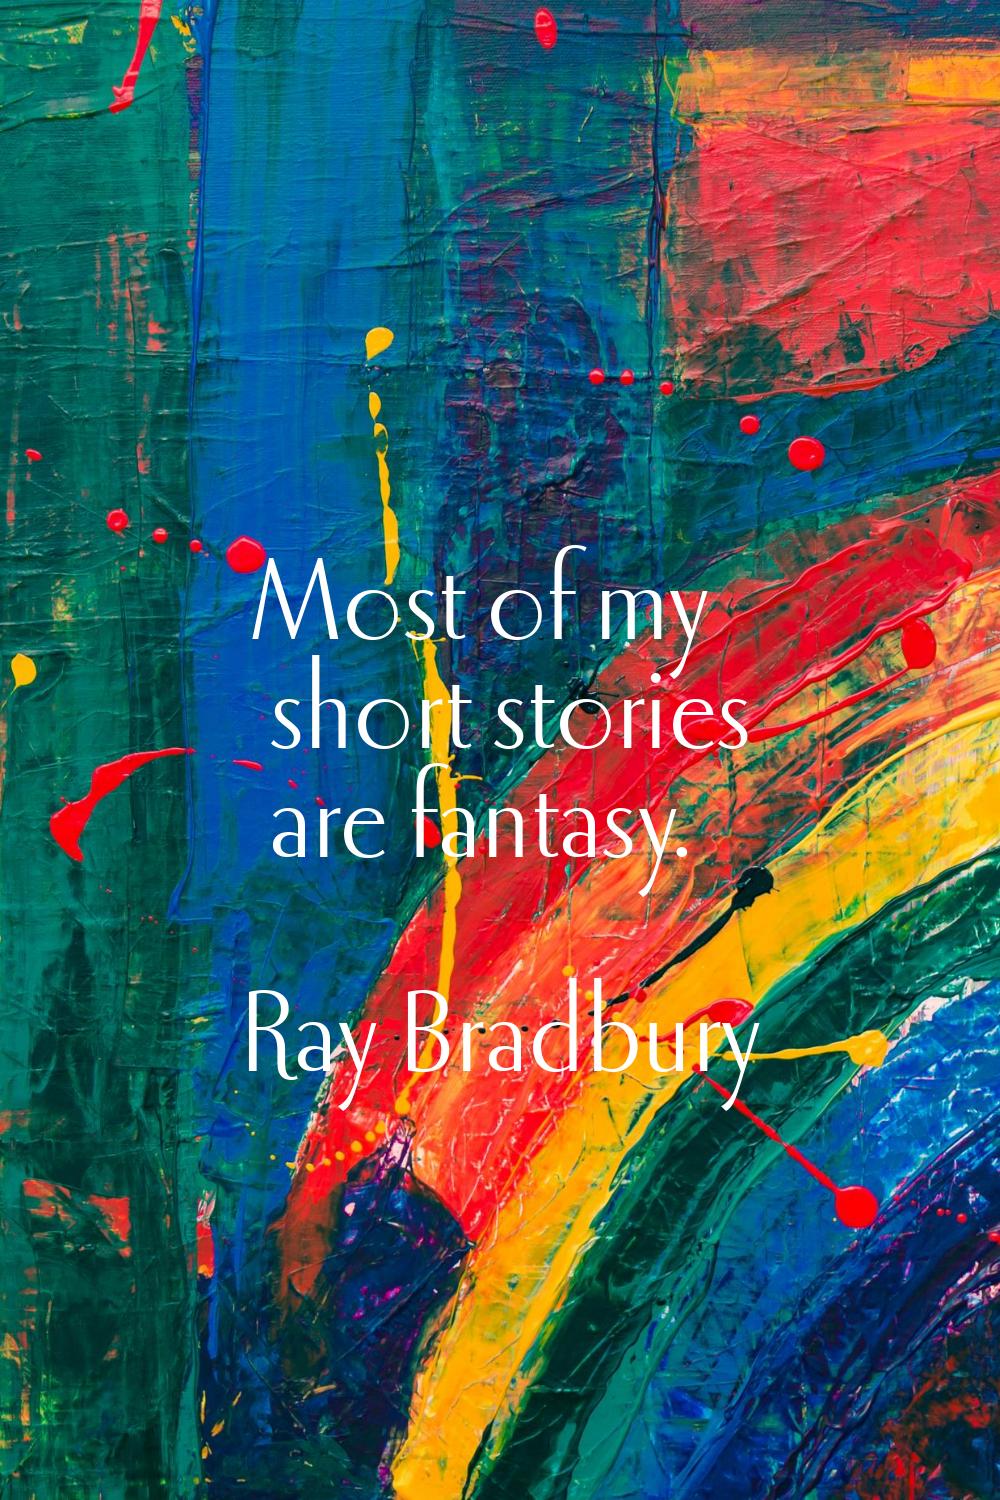 Most of my short stories are fantasy.